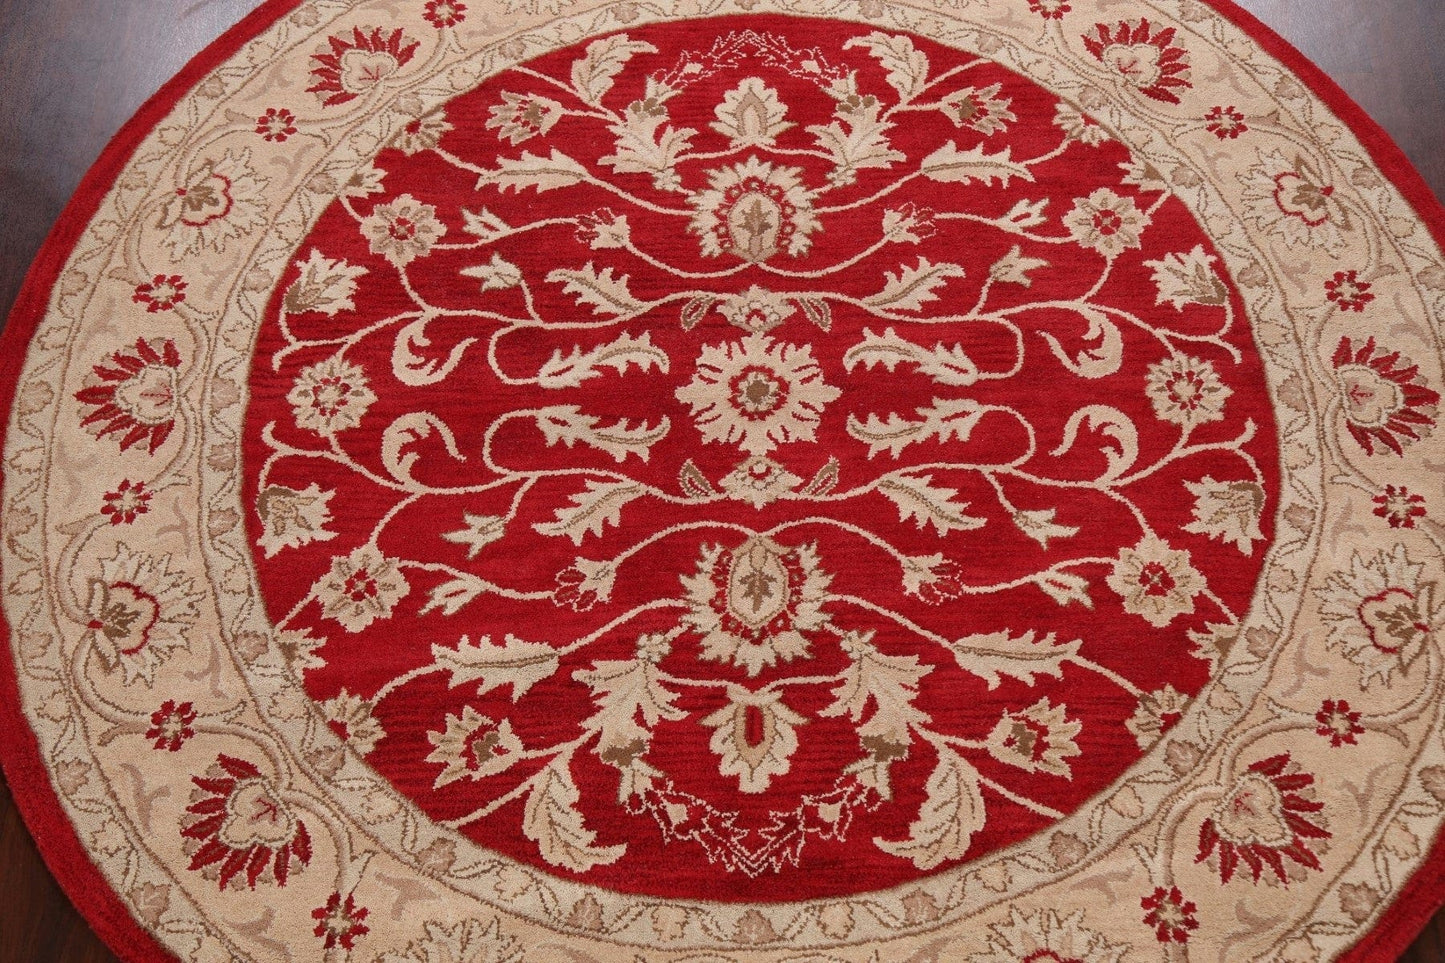 Hand-Tufted Wool Floral Round Rug 10x10